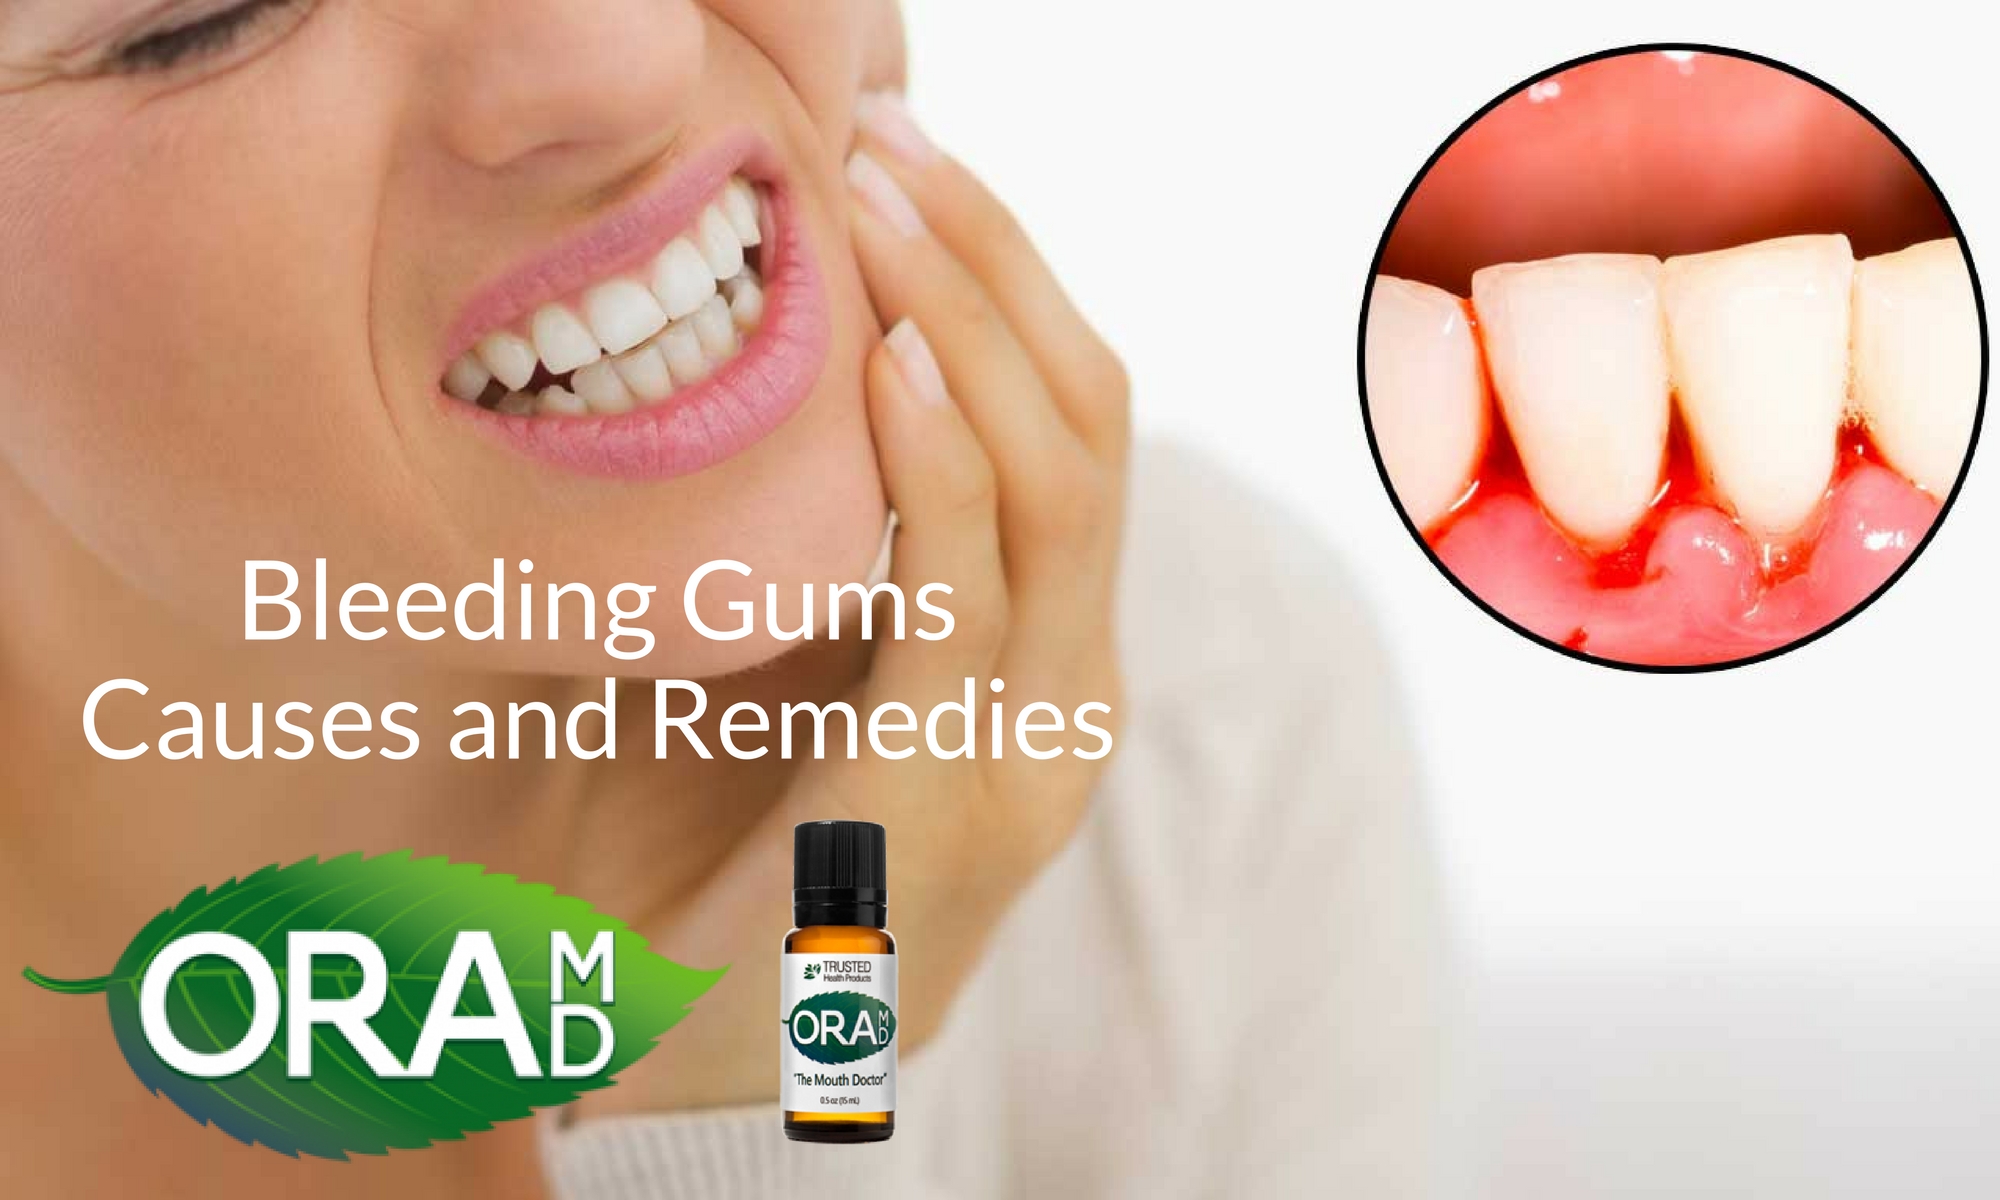 Bleeding Gums Causes and Remedies